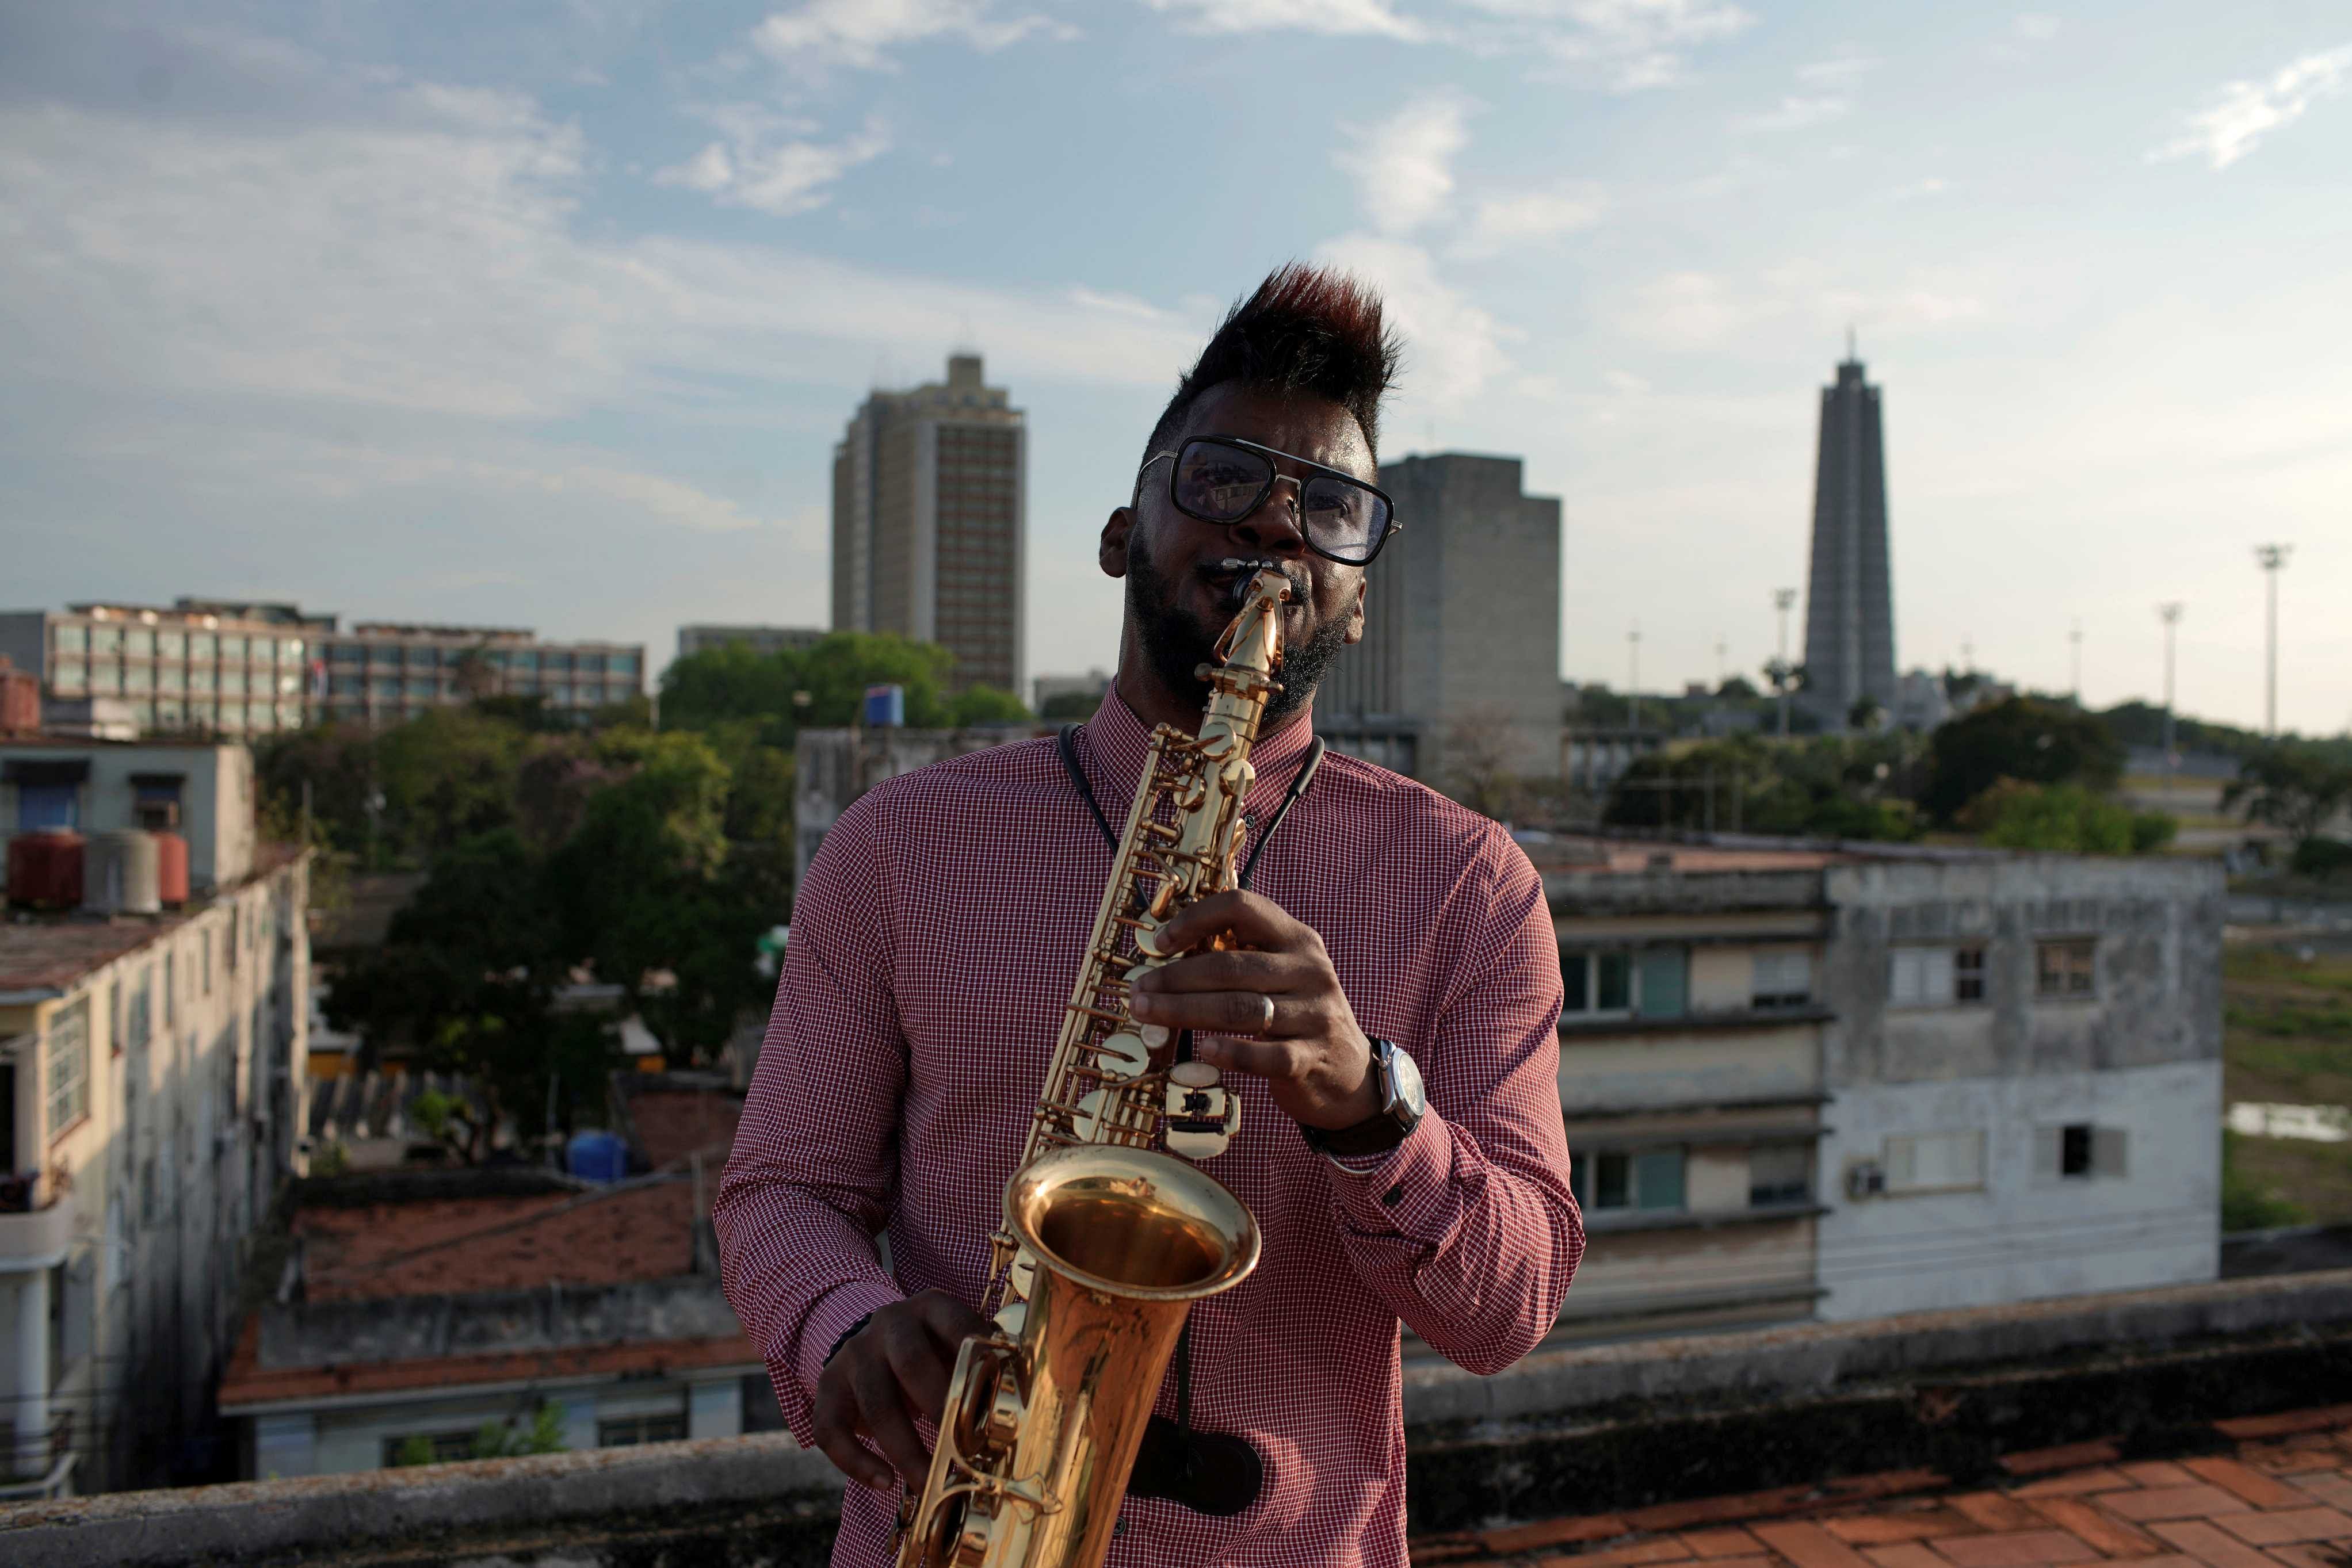 Saxophonist Michel Herrera performs for a TV camera on a rooftop in Havana, Cuba (Reuters)